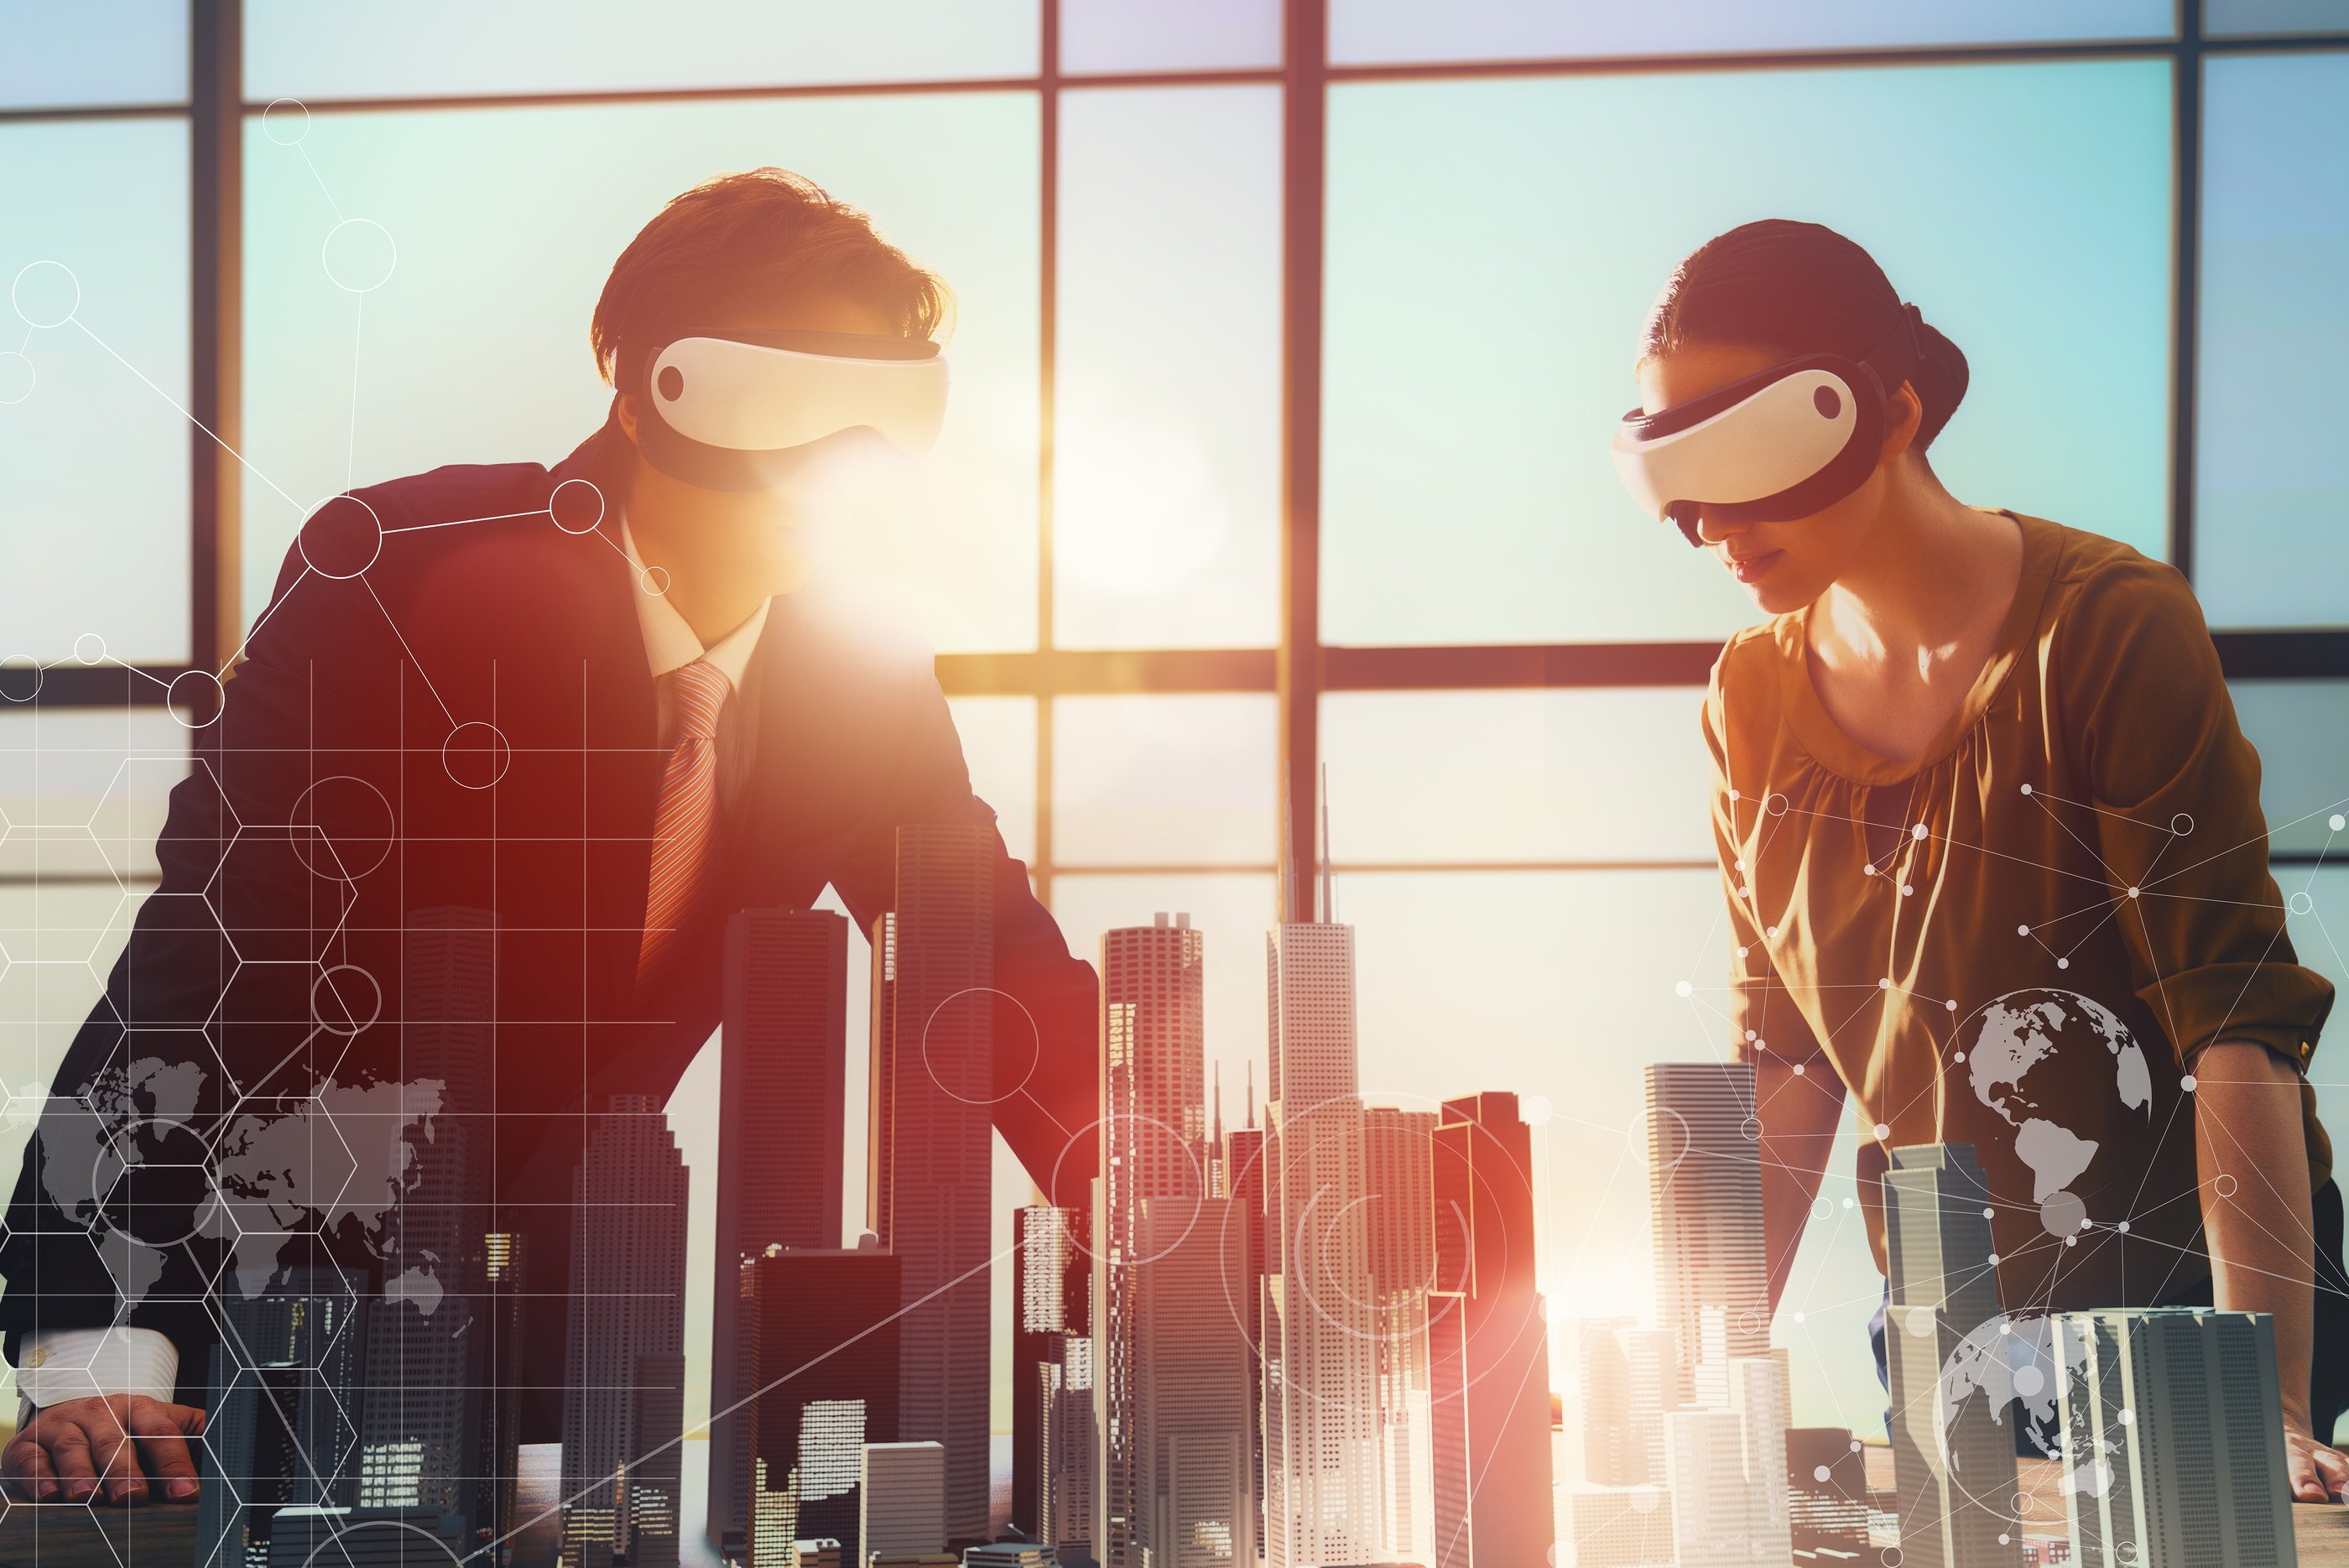 Virtual and Augmented Reality – The Future for Construction and Design